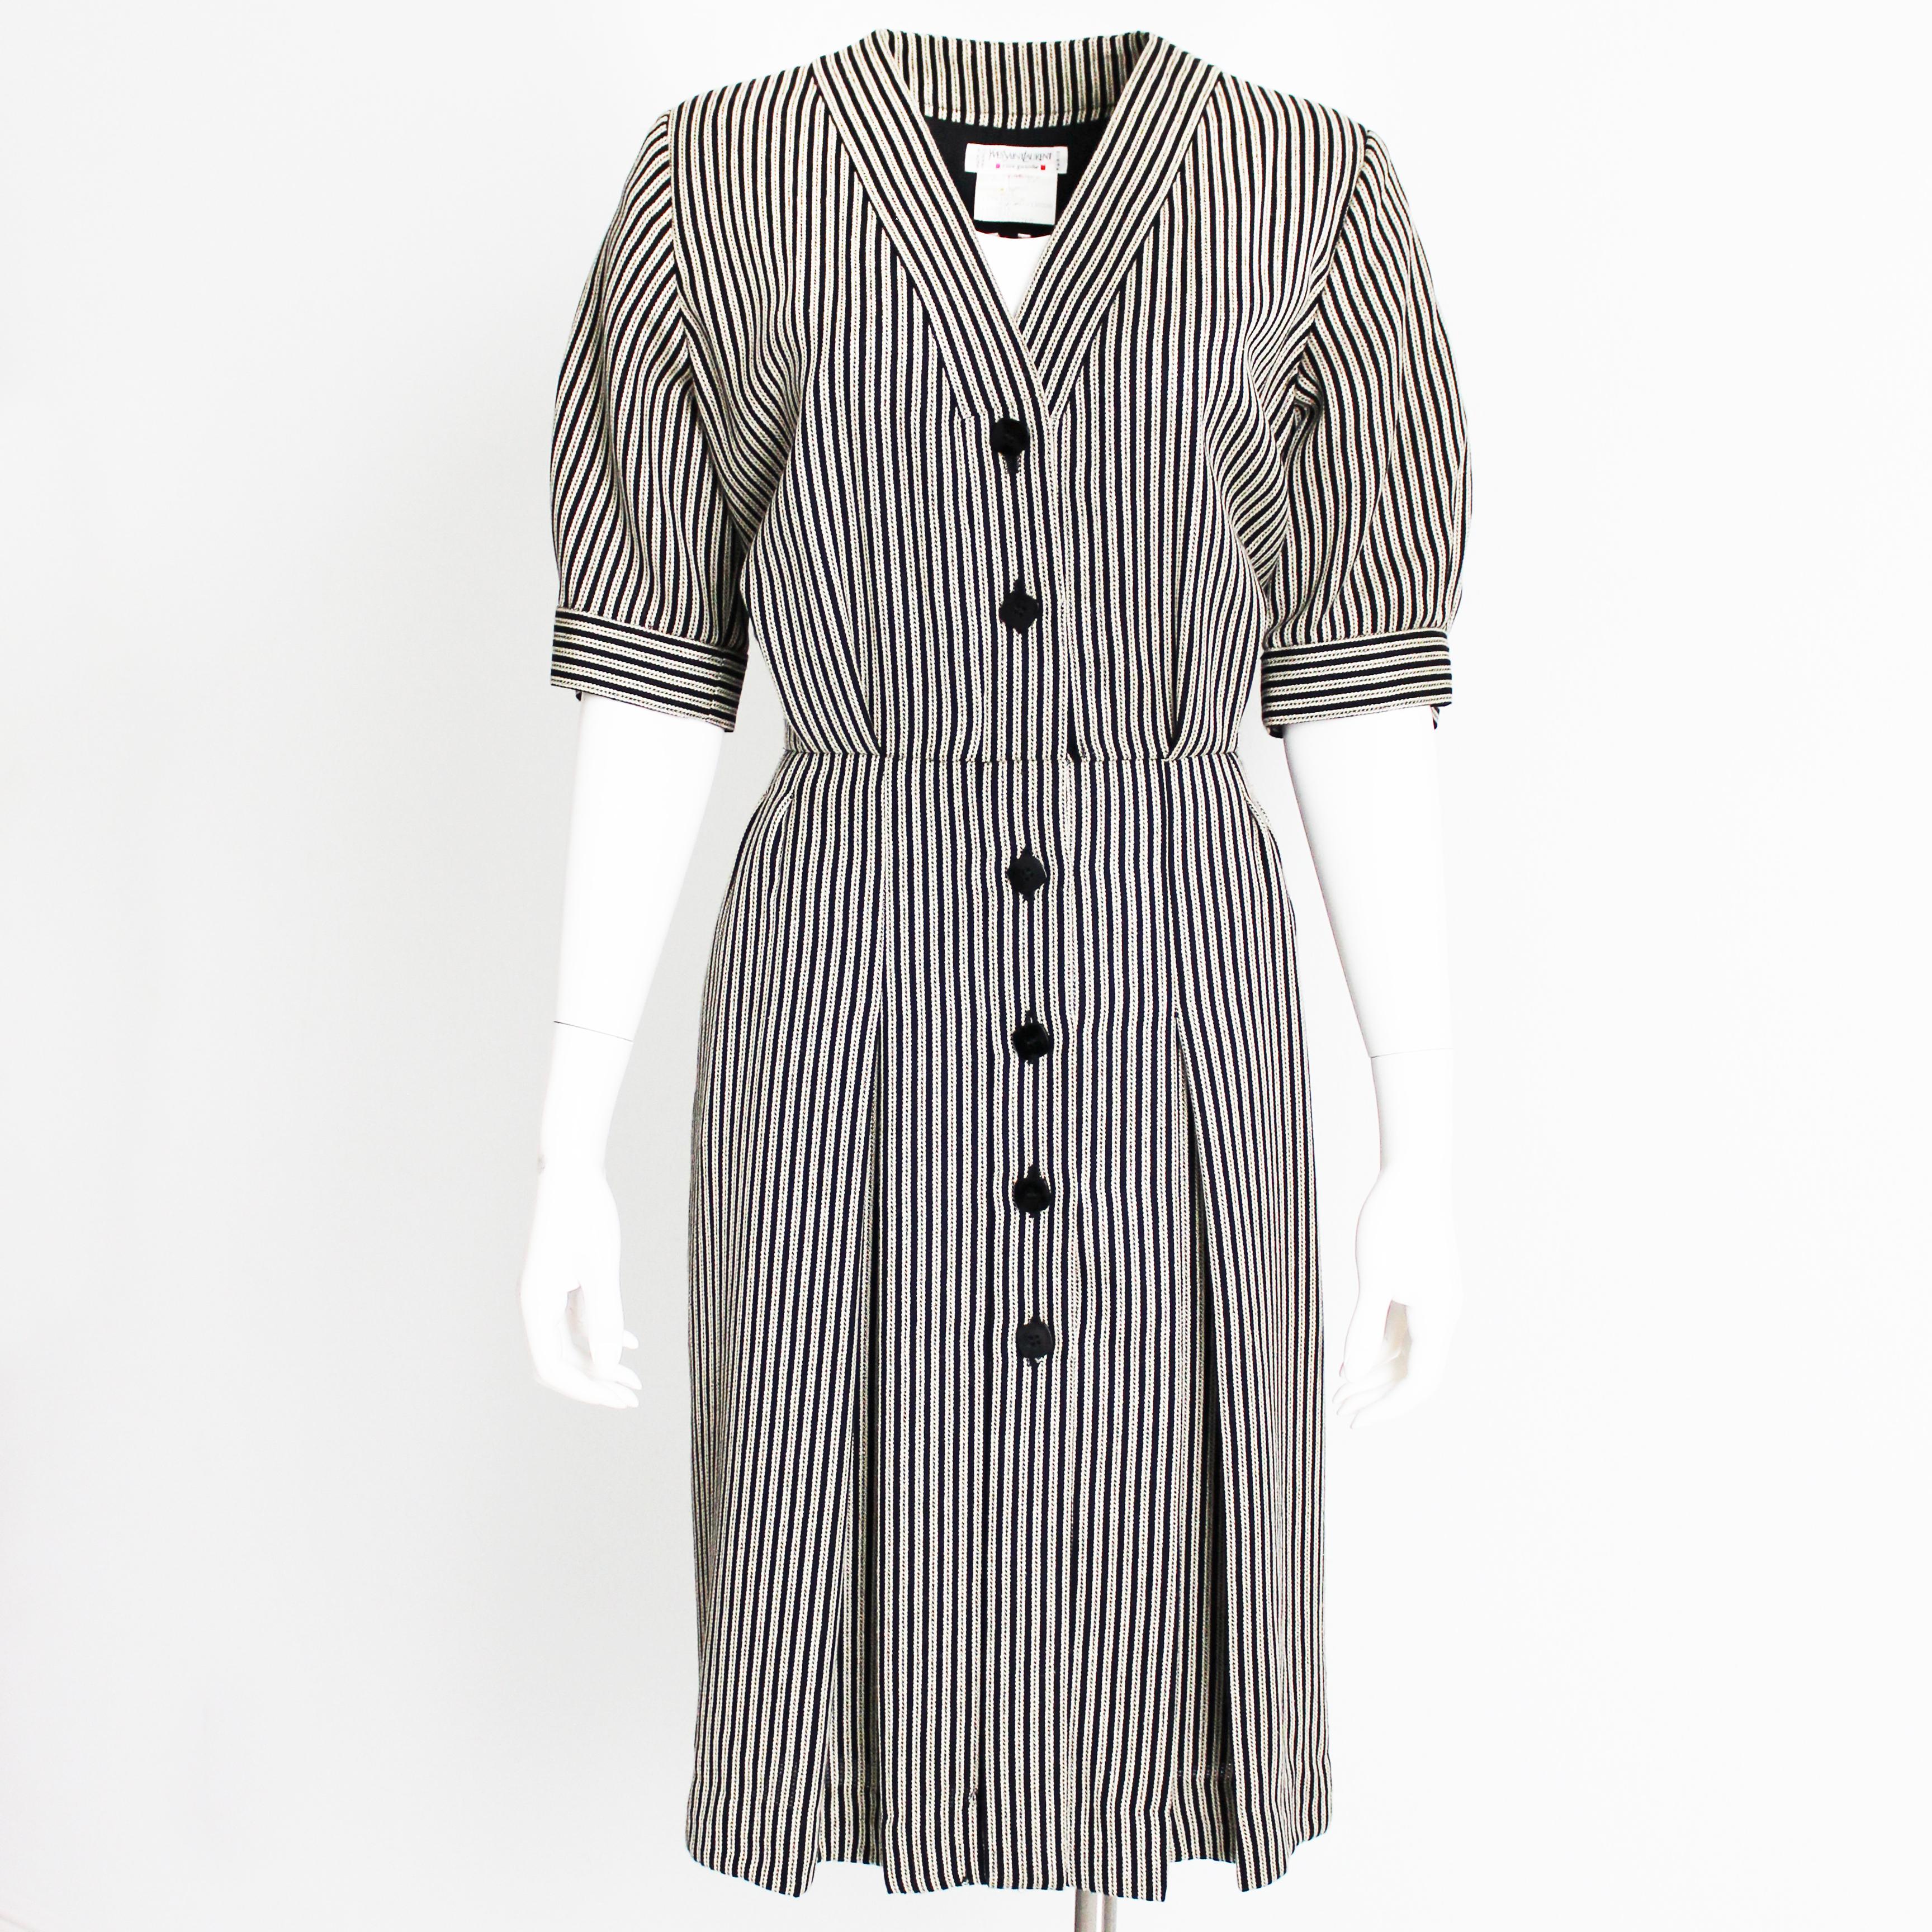 Authentic, preowned, vintage Yves Saint Laurent Rive Gauche pinstripe dress, likely made in the 1990s.  Made from a wool/silk/rayon blend woven pinstripe fabric, it features button-front styling, a cinched waist, slash pockets at the hips and pretty